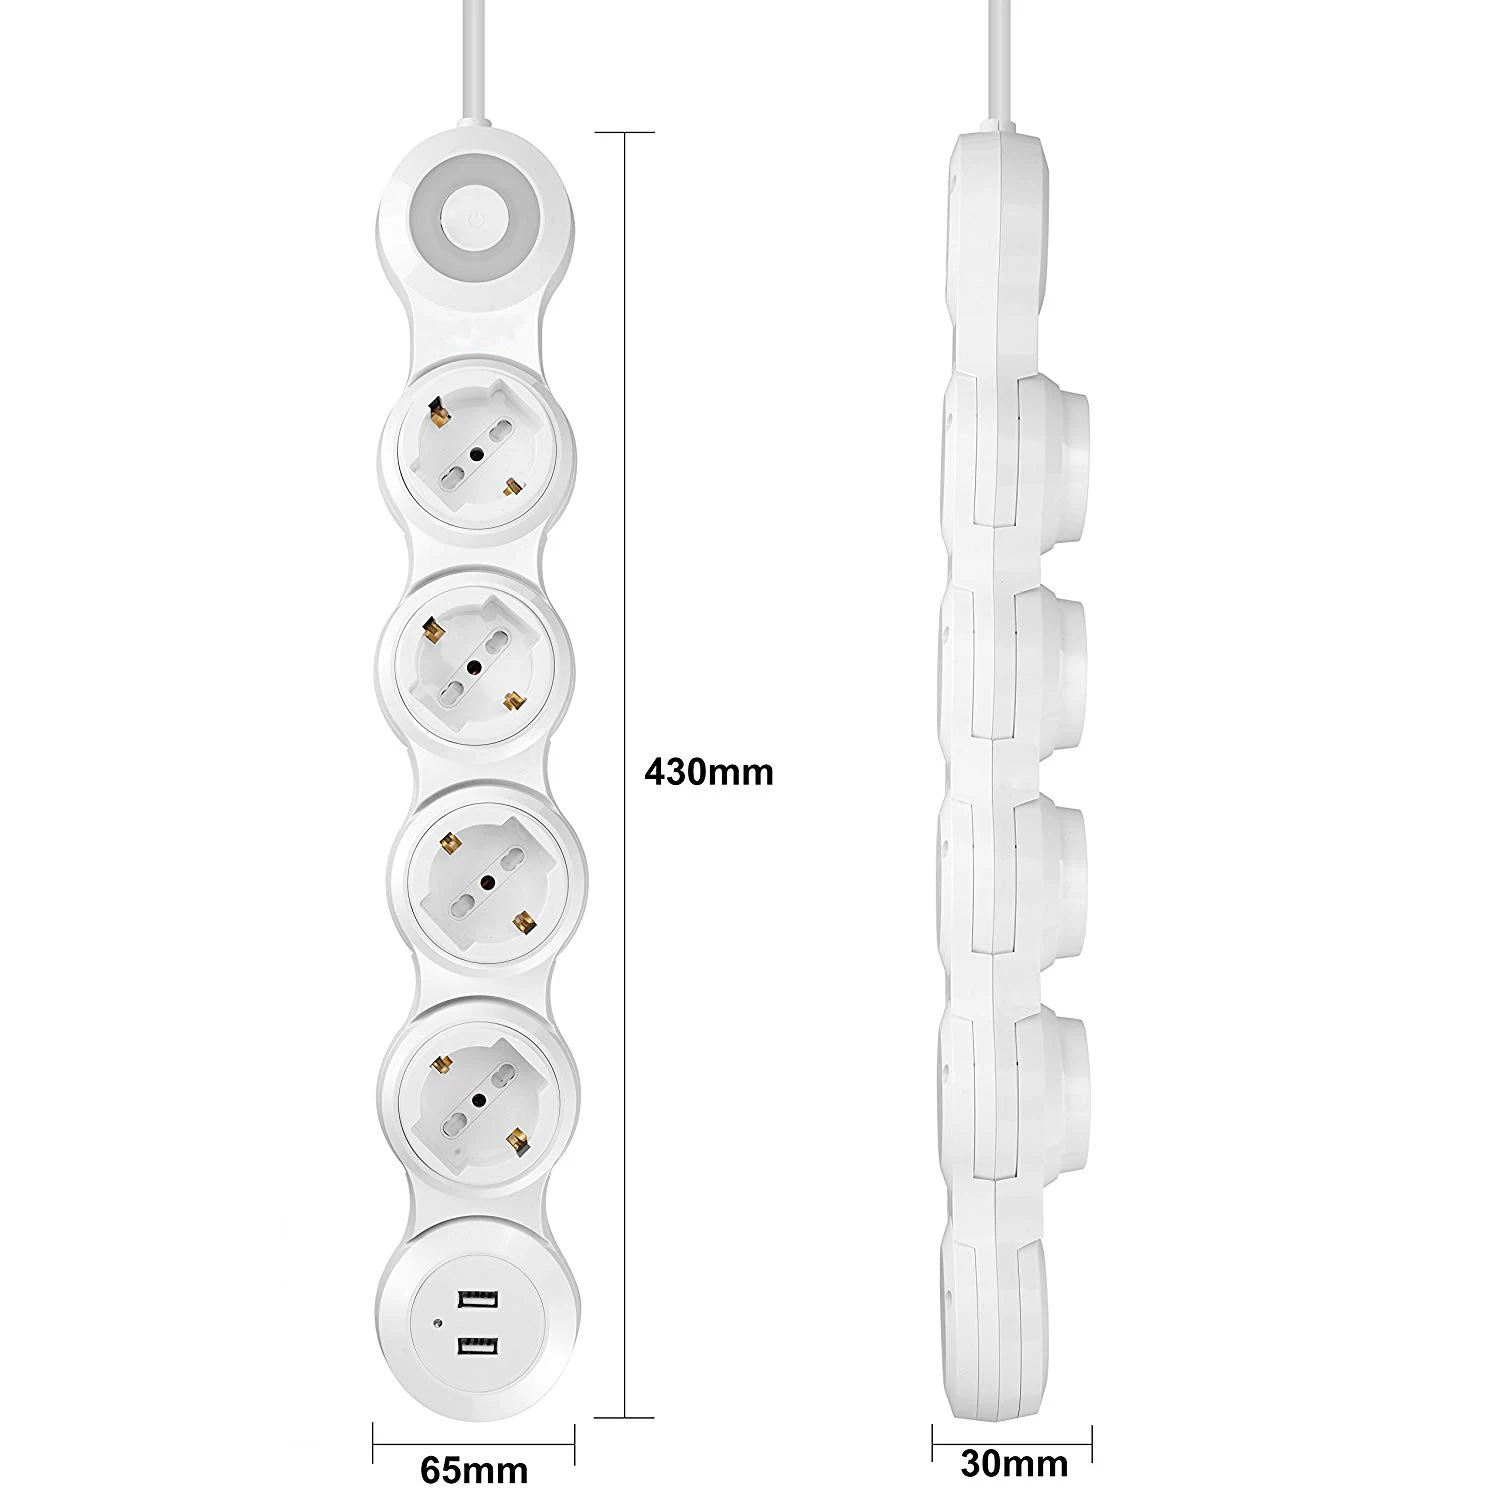 Power Strip Multiple 4 way EU Outlets Electric Switch Plug Socket with USB Port 2500W 10A 1.8m Extension Cord Travel Home Office